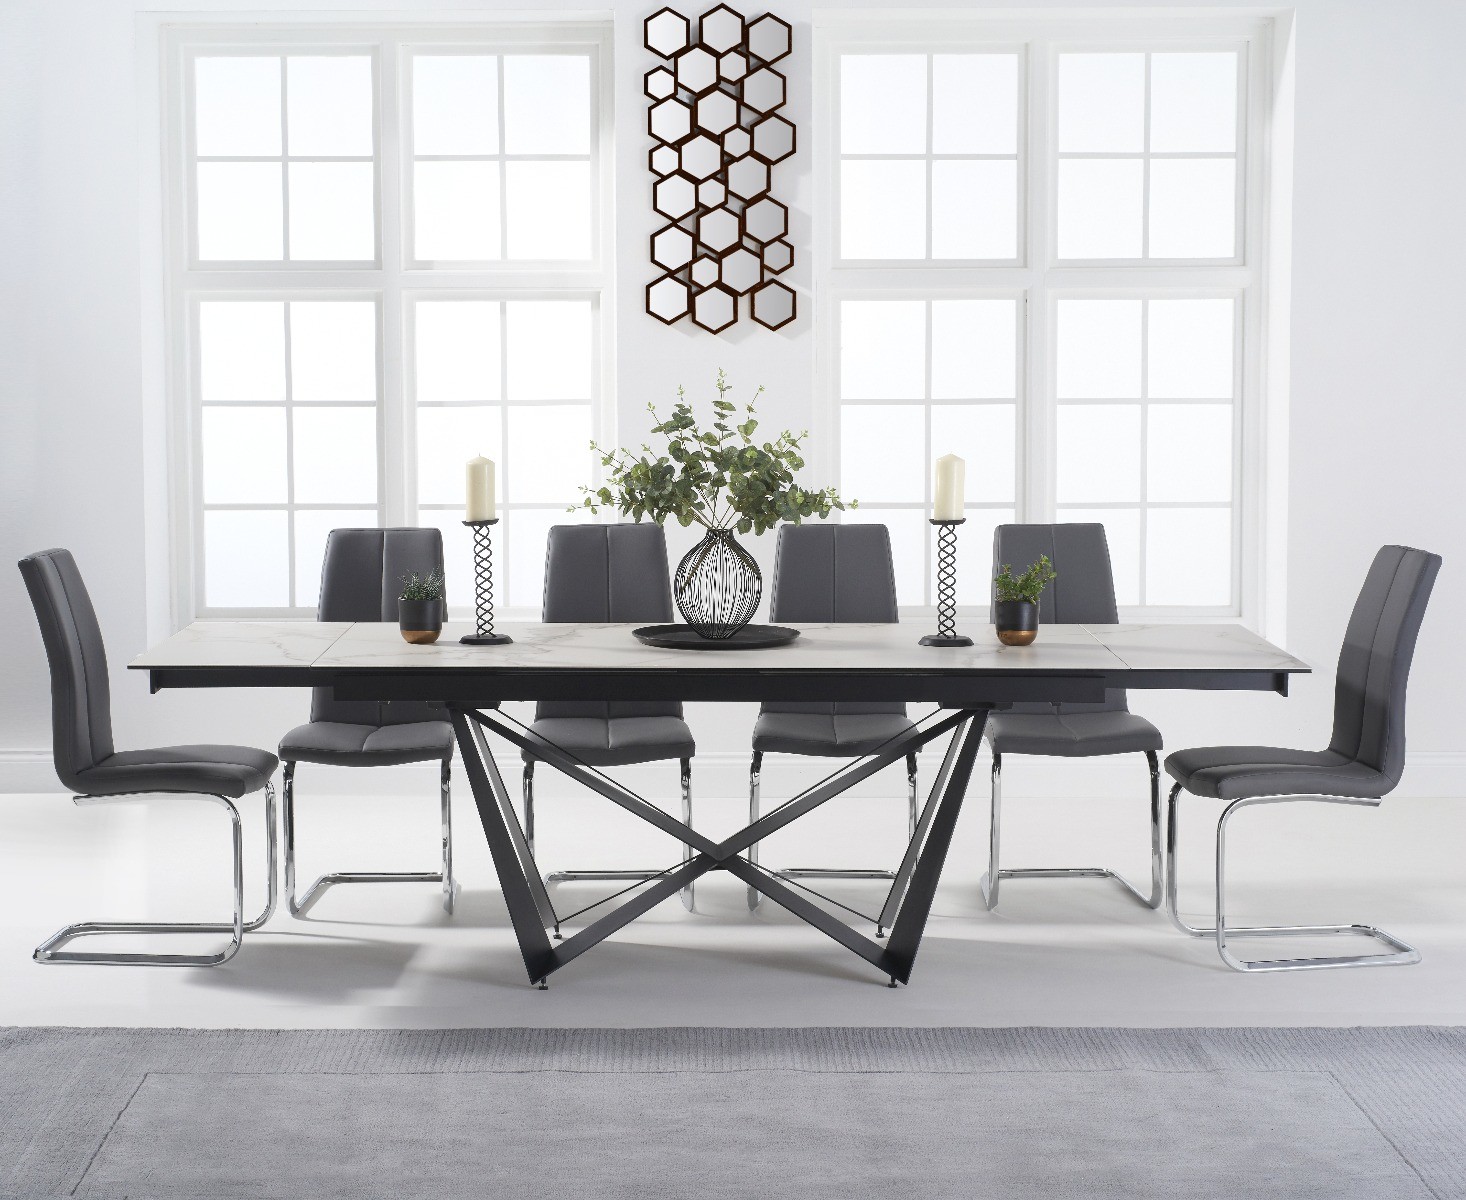 Blenheim 180cm White Ceramic Dining Table With 10 Grey Tarin Chairs